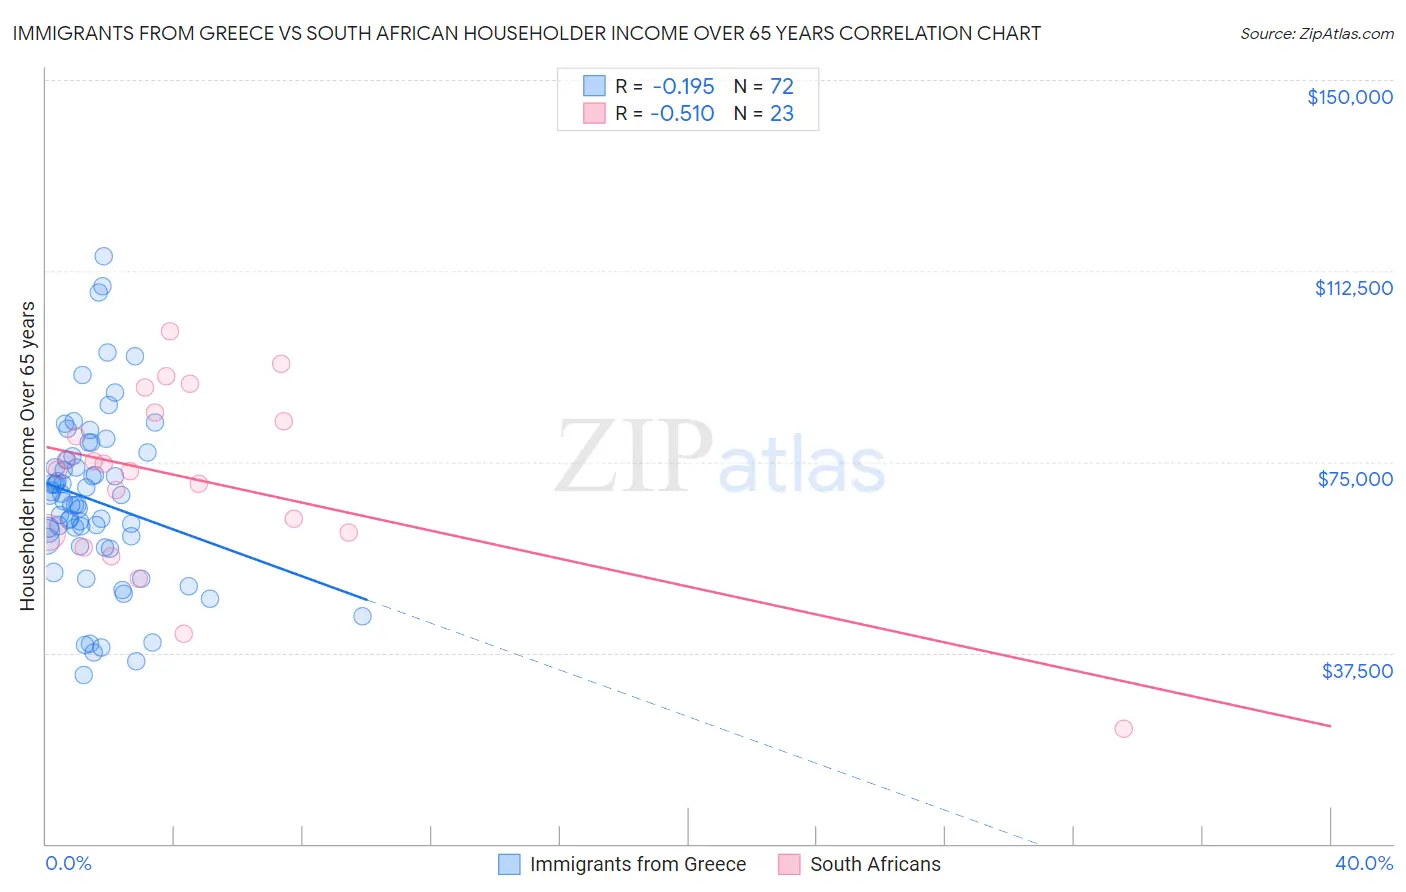 Immigrants from Greece vs South African Householder Income Over 65 years